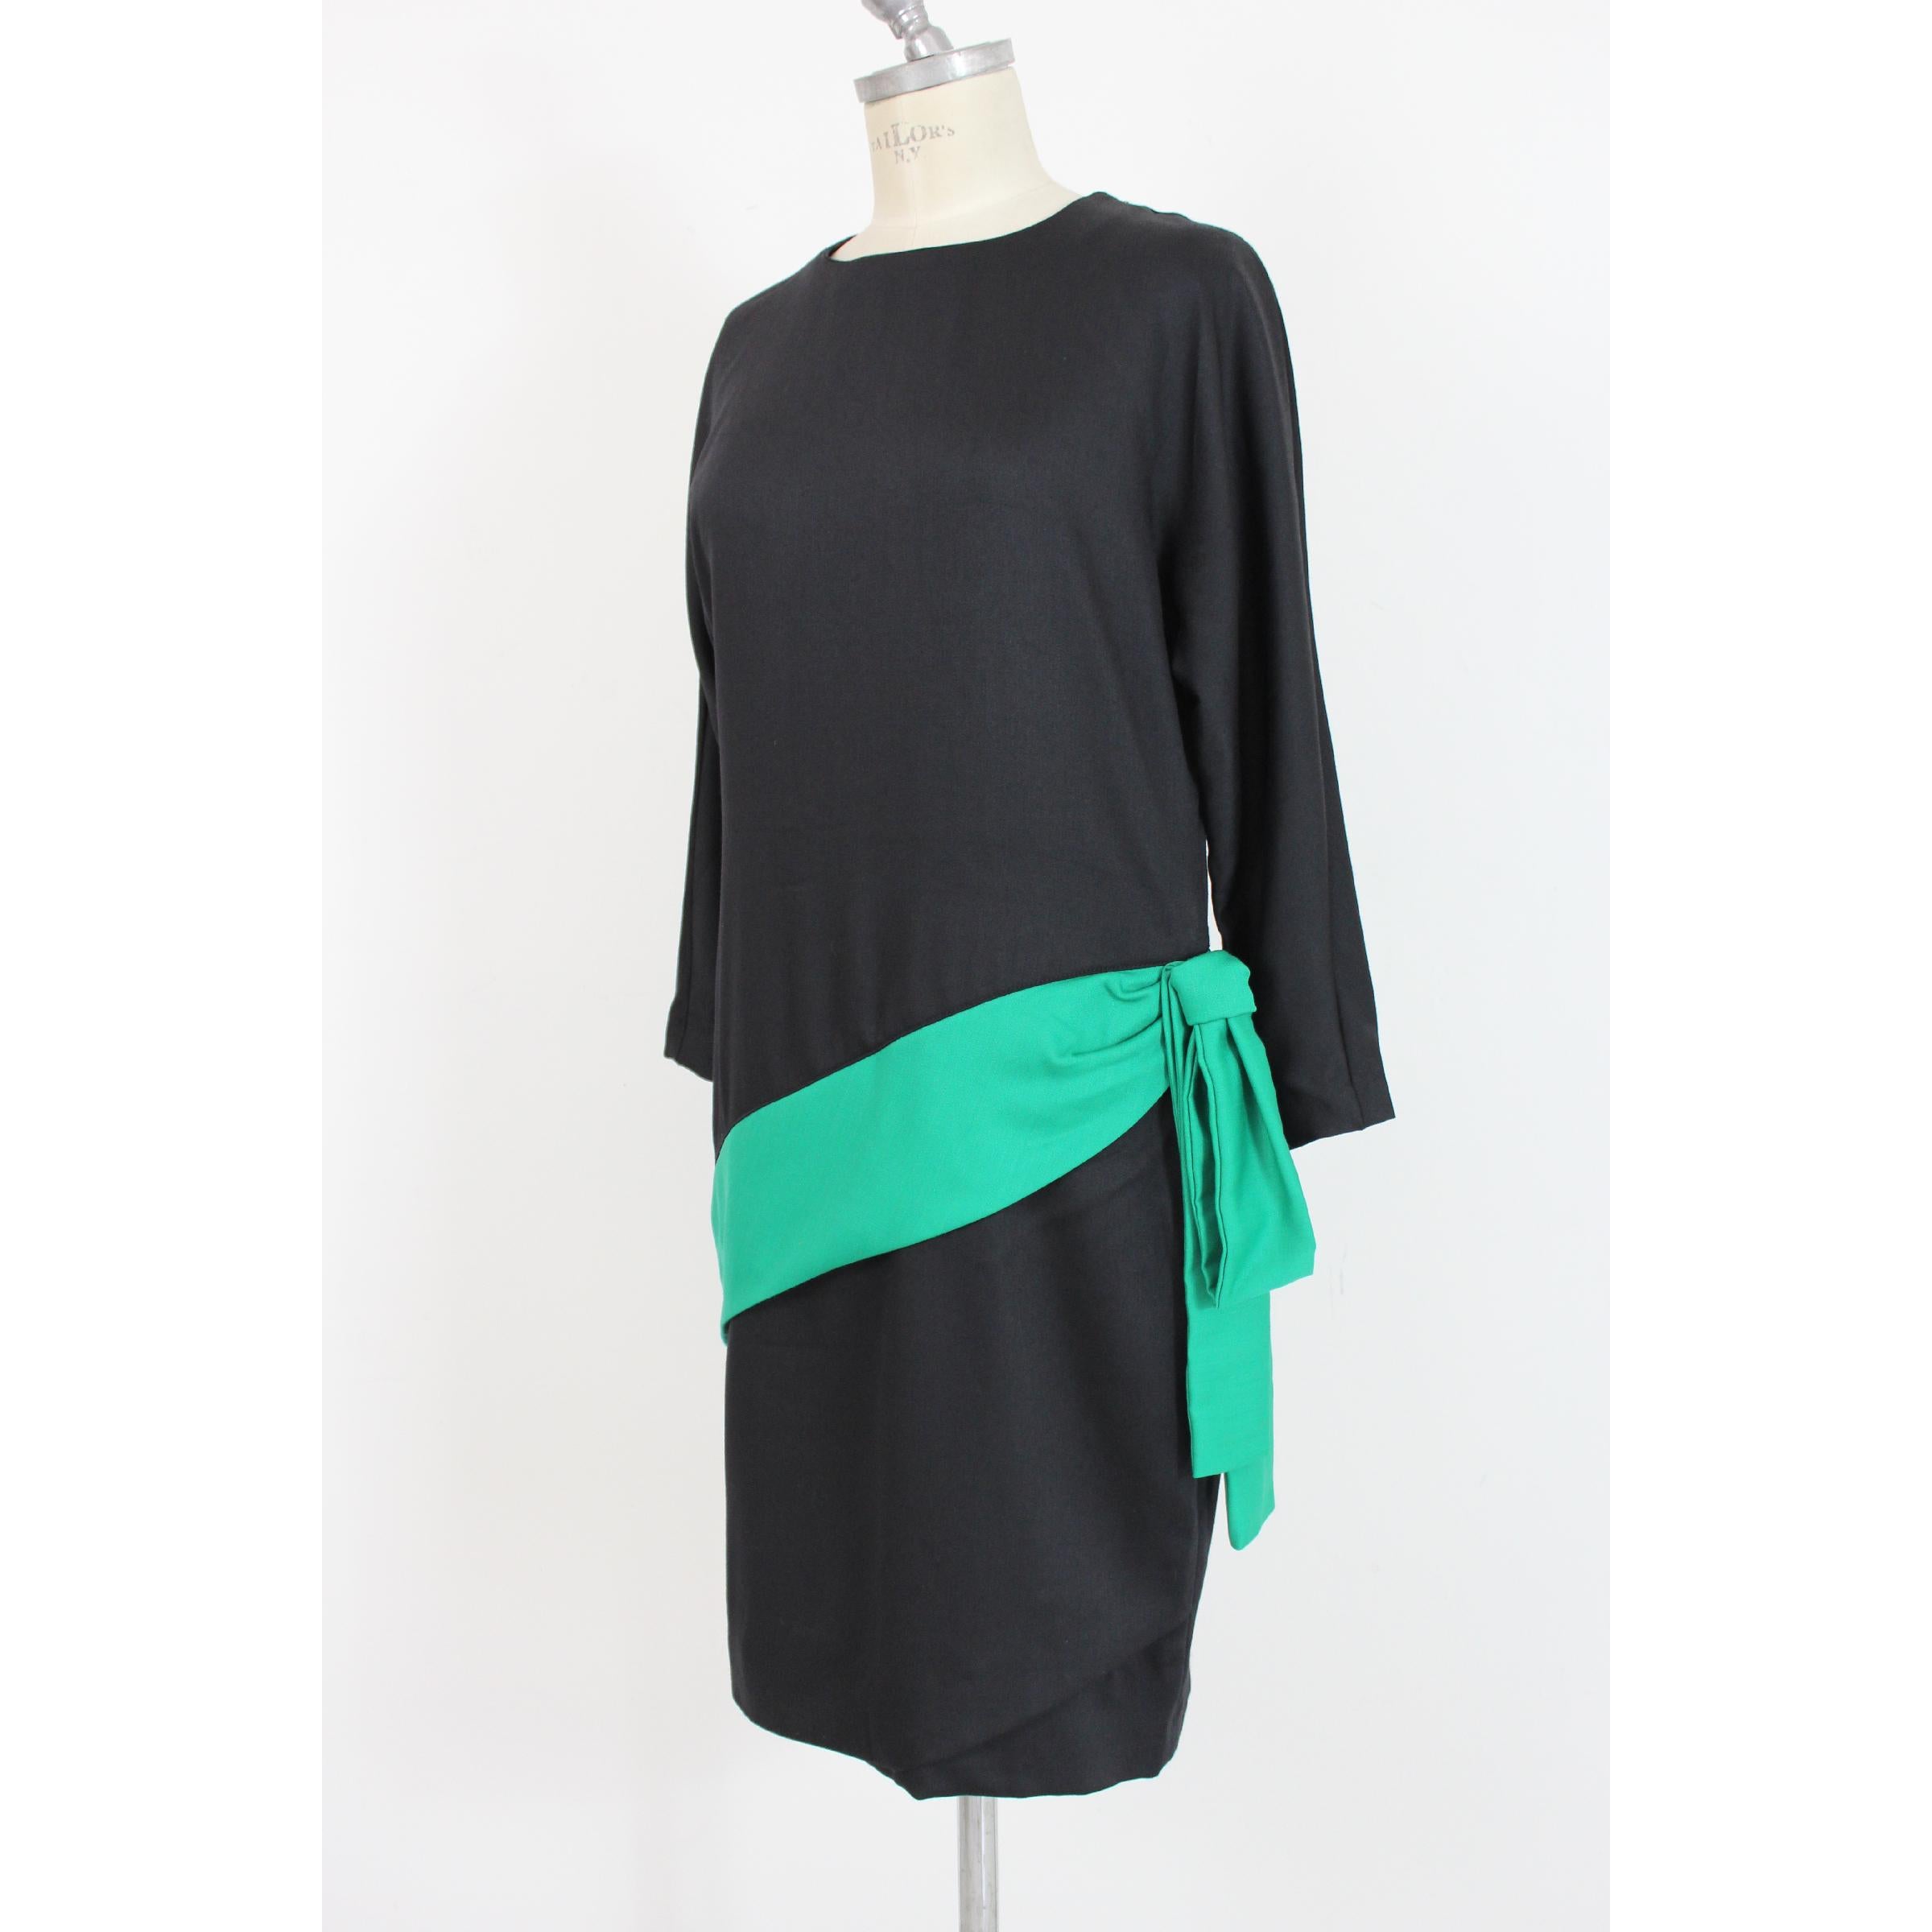 Adriana Kastern Black Green Wool Bow Evening Cocktail Dress 1980s In Excellent Condition For Sale In Brindisi, Bt